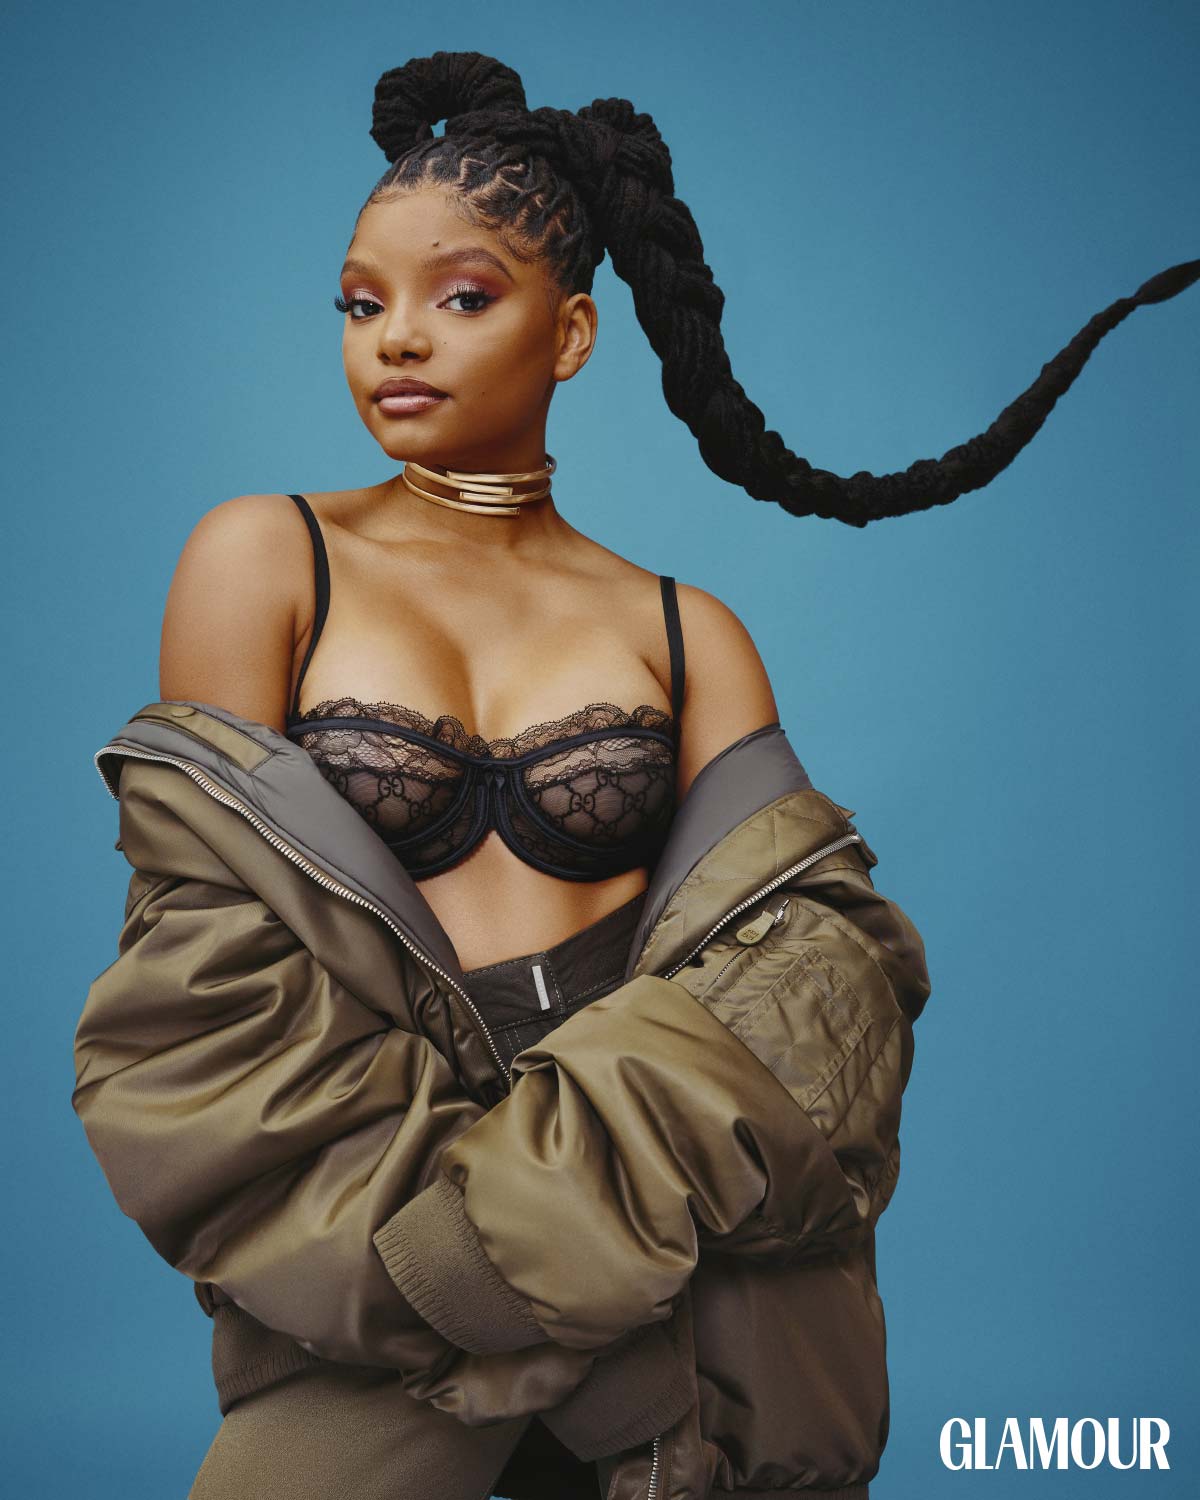 Halle Bailey covers Glamor Magazine and talks about “The Color Purple”